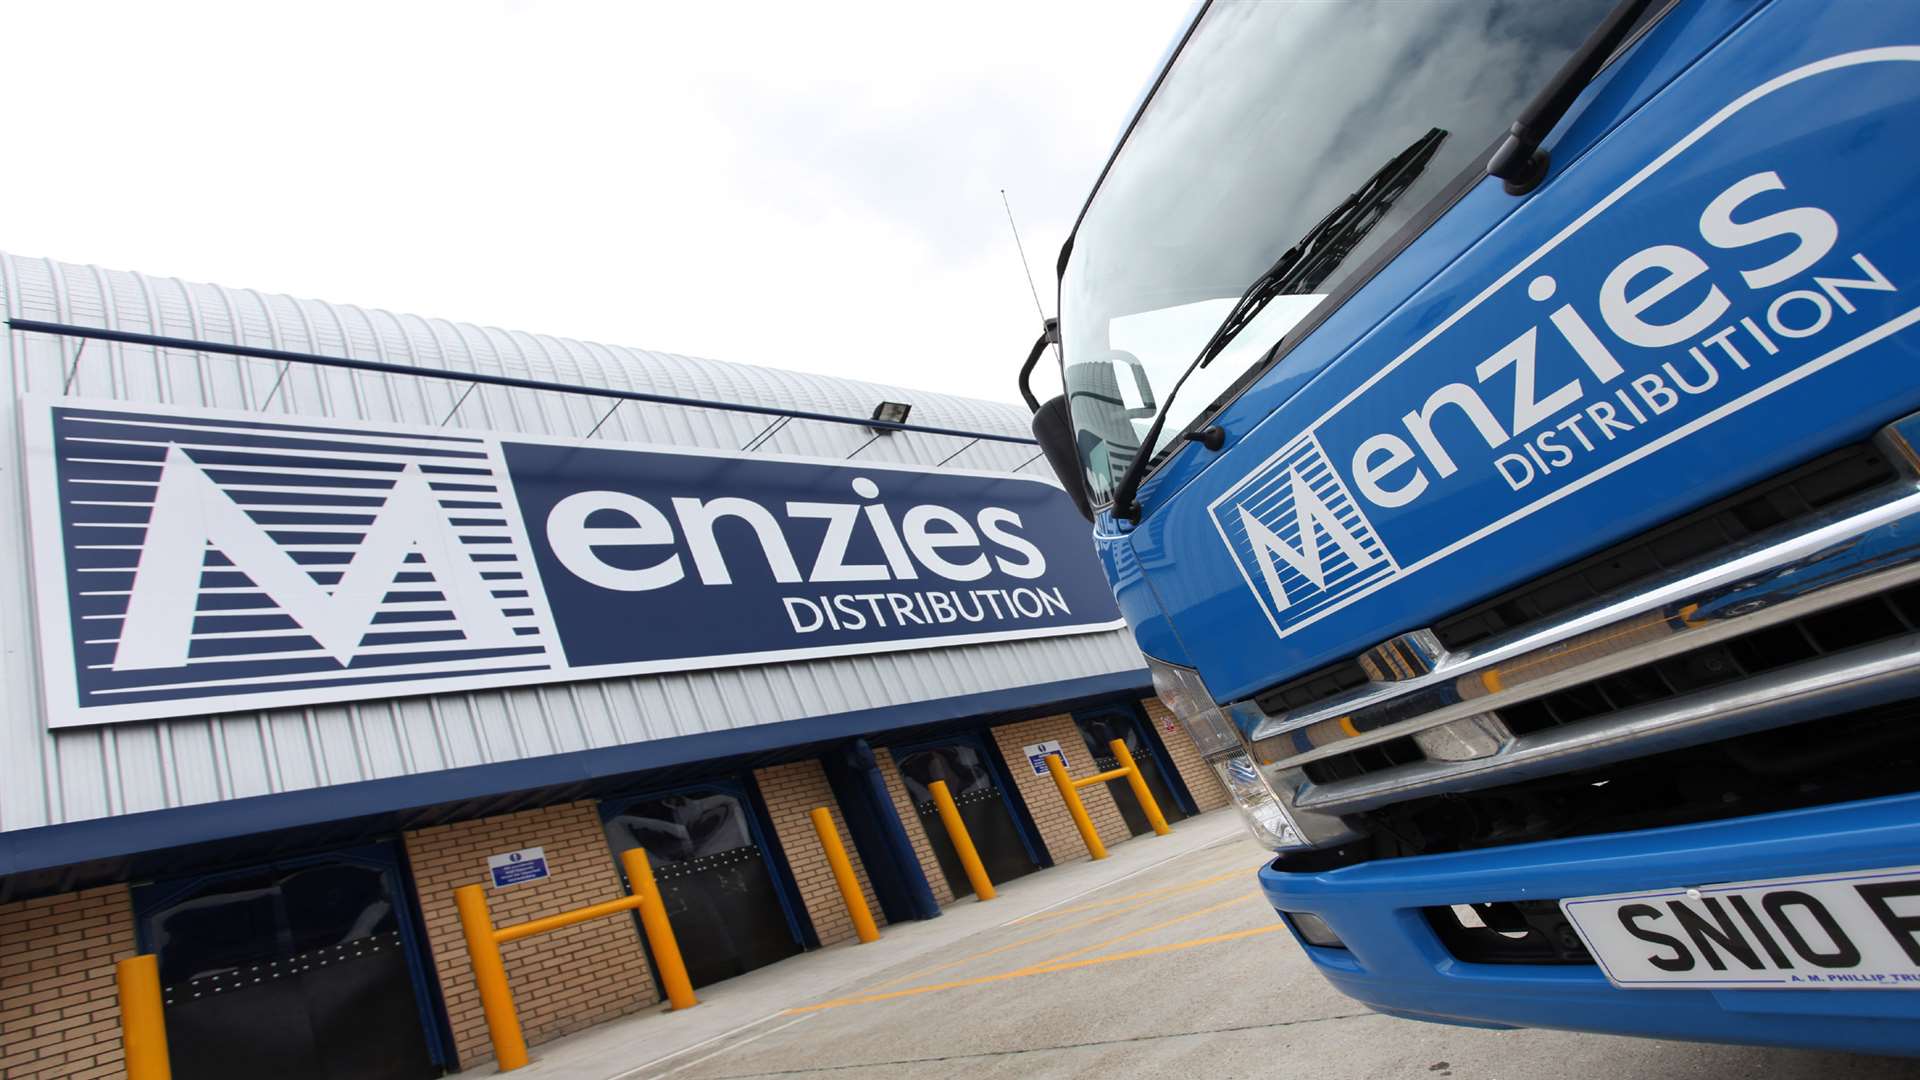 Menzies Distribution staff have voted to approve an offer